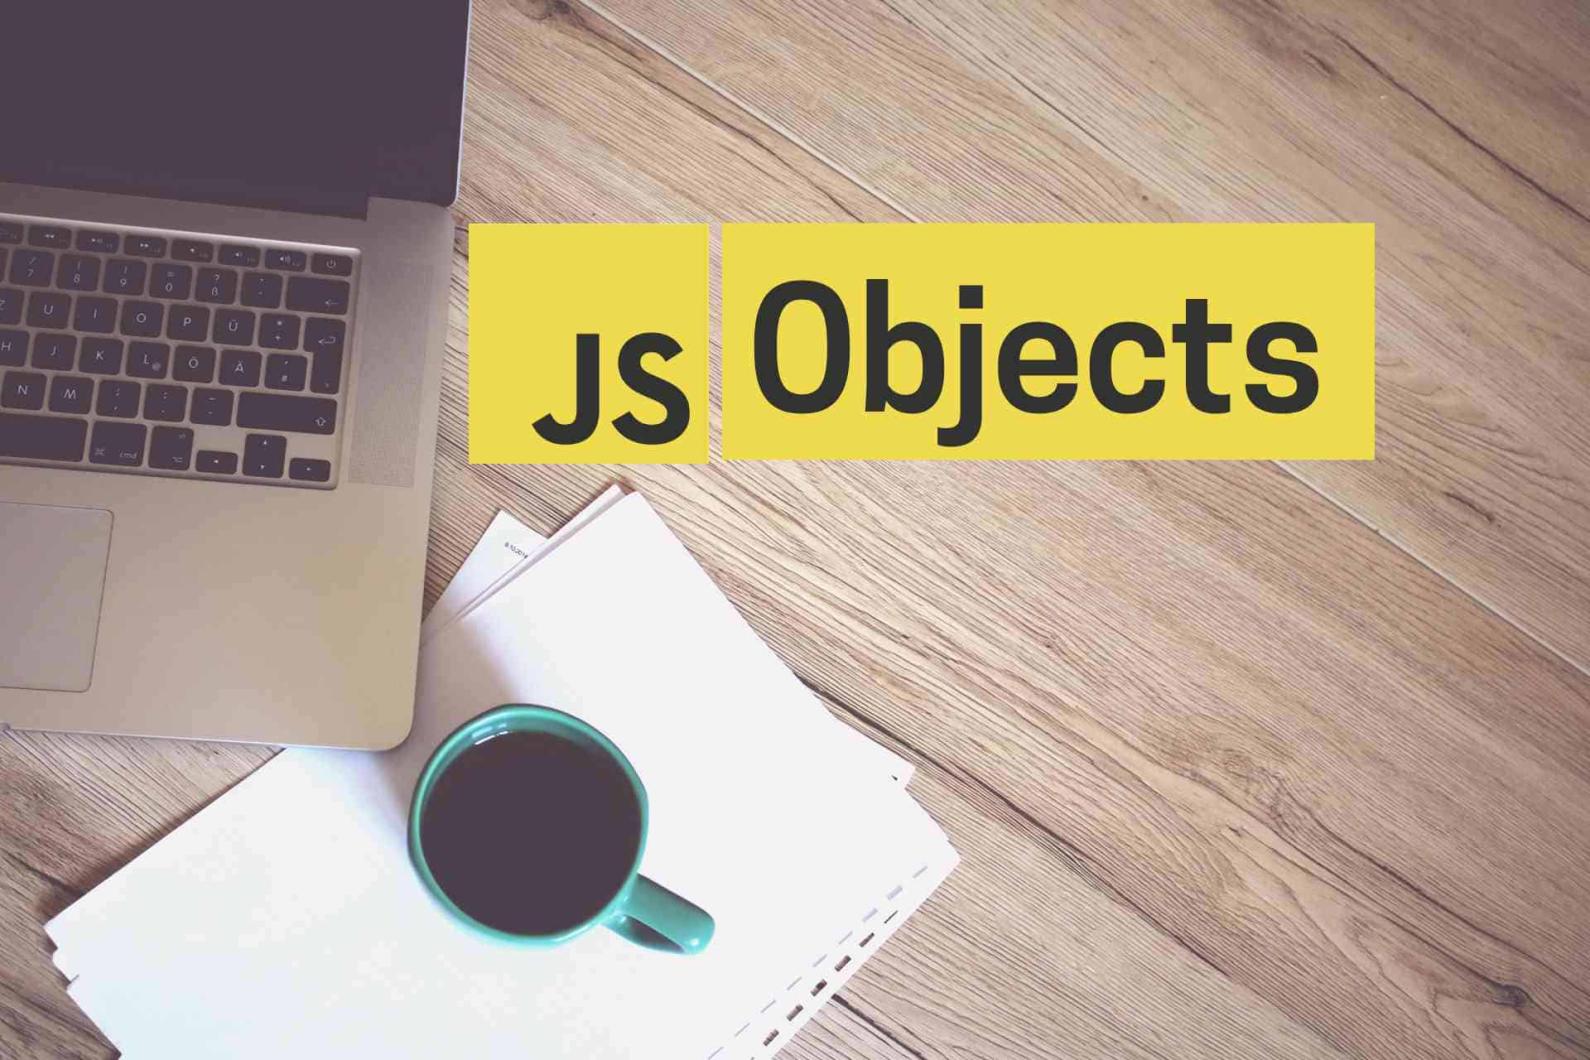 How Can I Access and Modify Properties of a JavaScript Object?